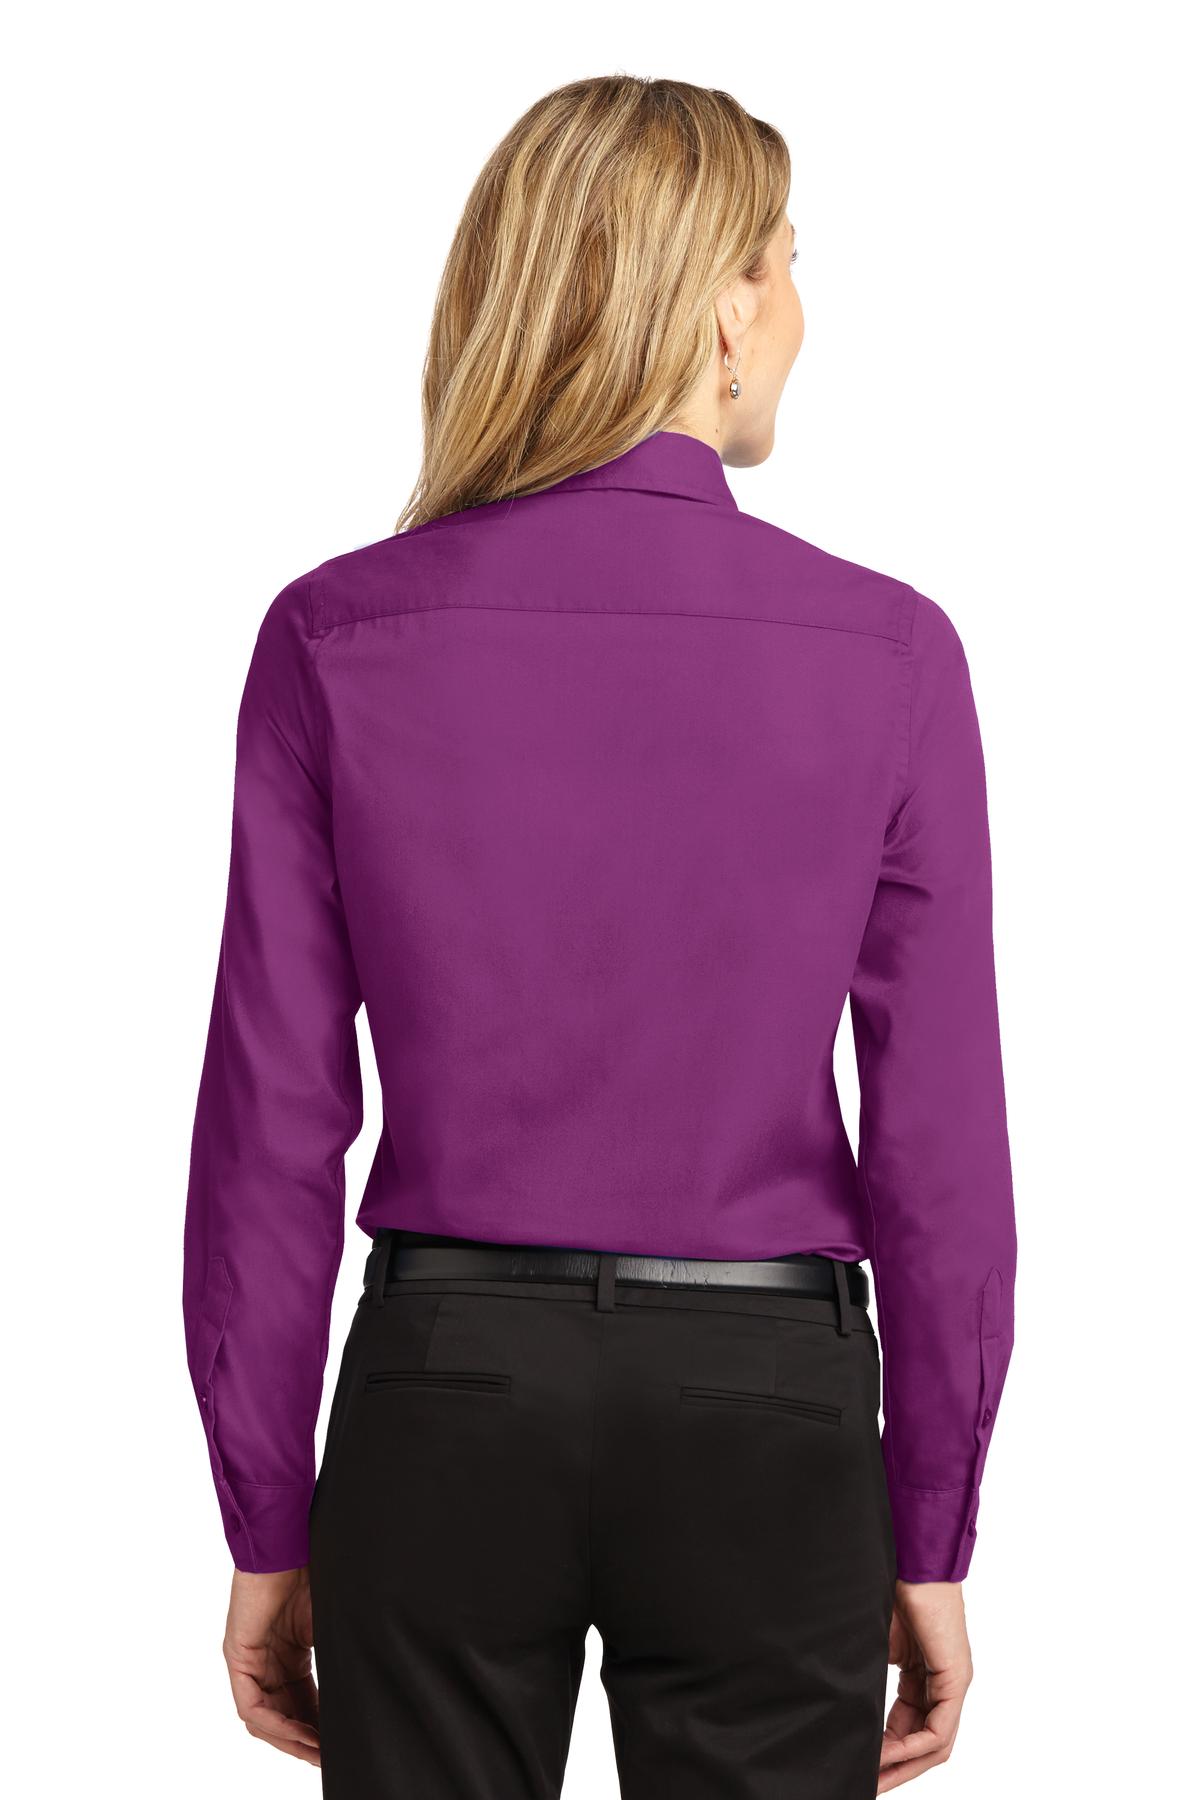 Port Authority® Ladies Long Sleeve Easy Care Shirt. L608 [Deep Berry] - DFW Impression